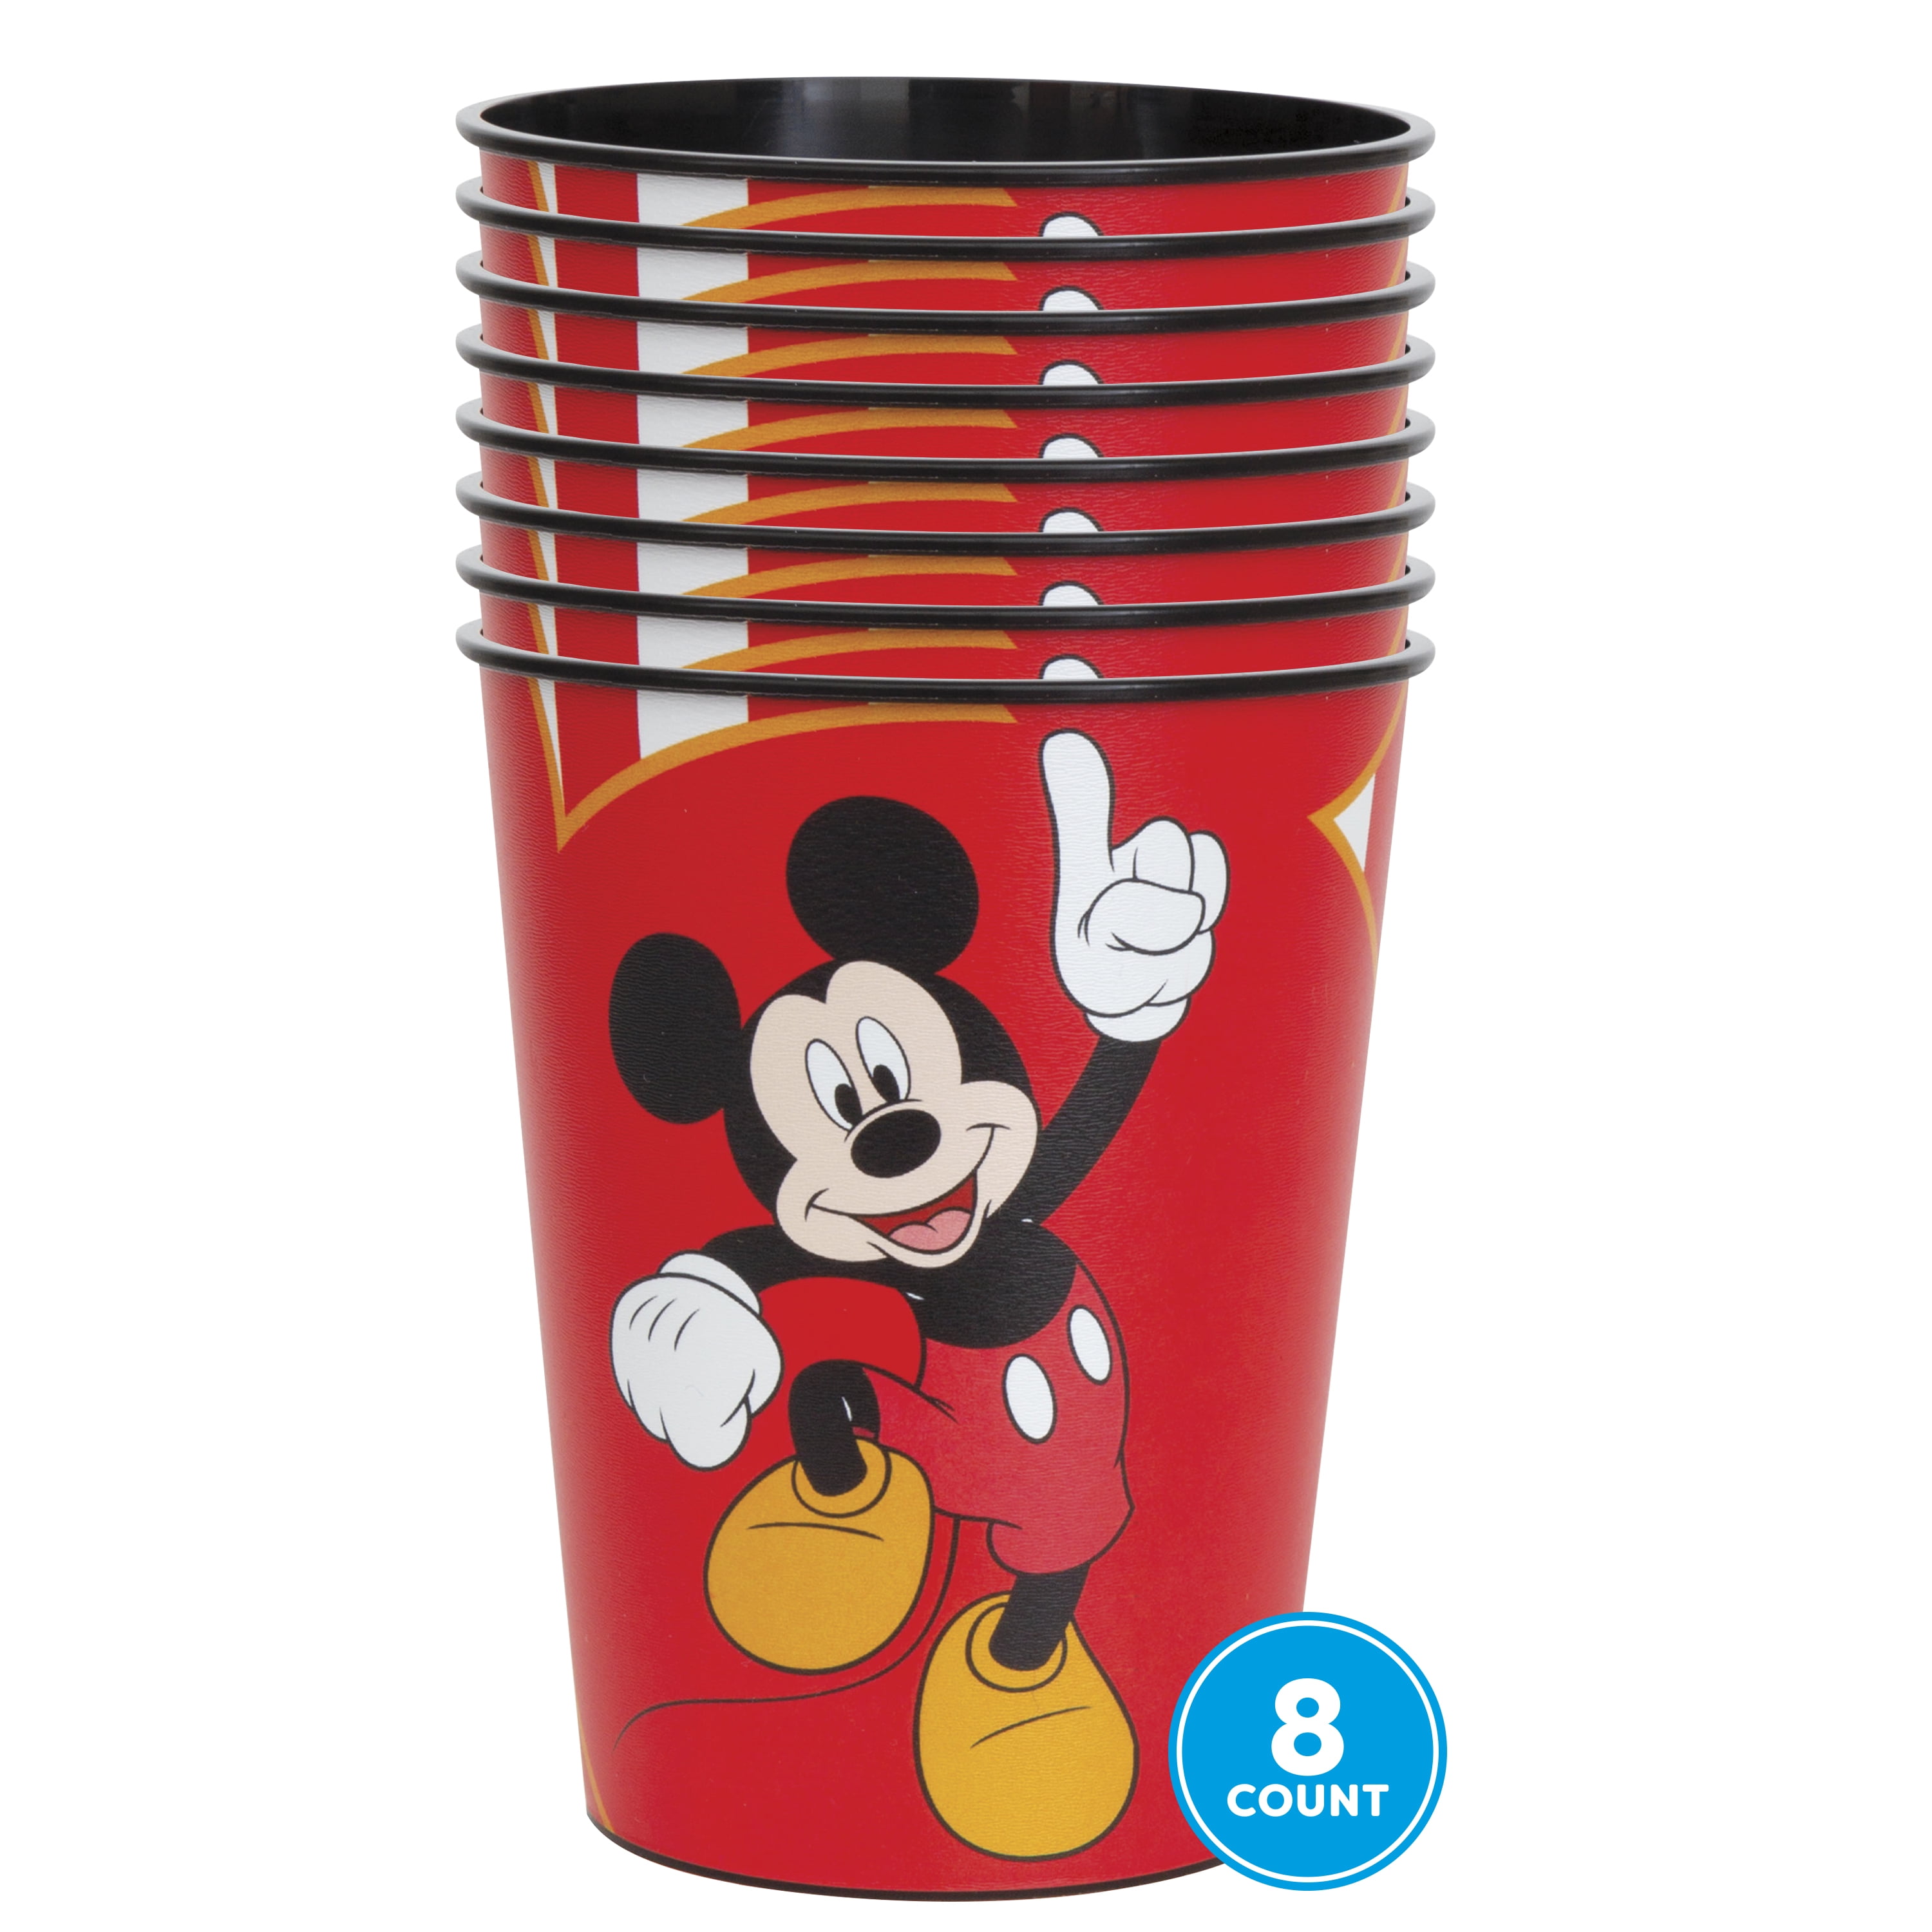 Mickey Mouse Forever Party Supplies Pack Serves 16 Bundle for 16 Dinner Plates Luncheon Napkins Cups and Table Cover with Birthday Candles